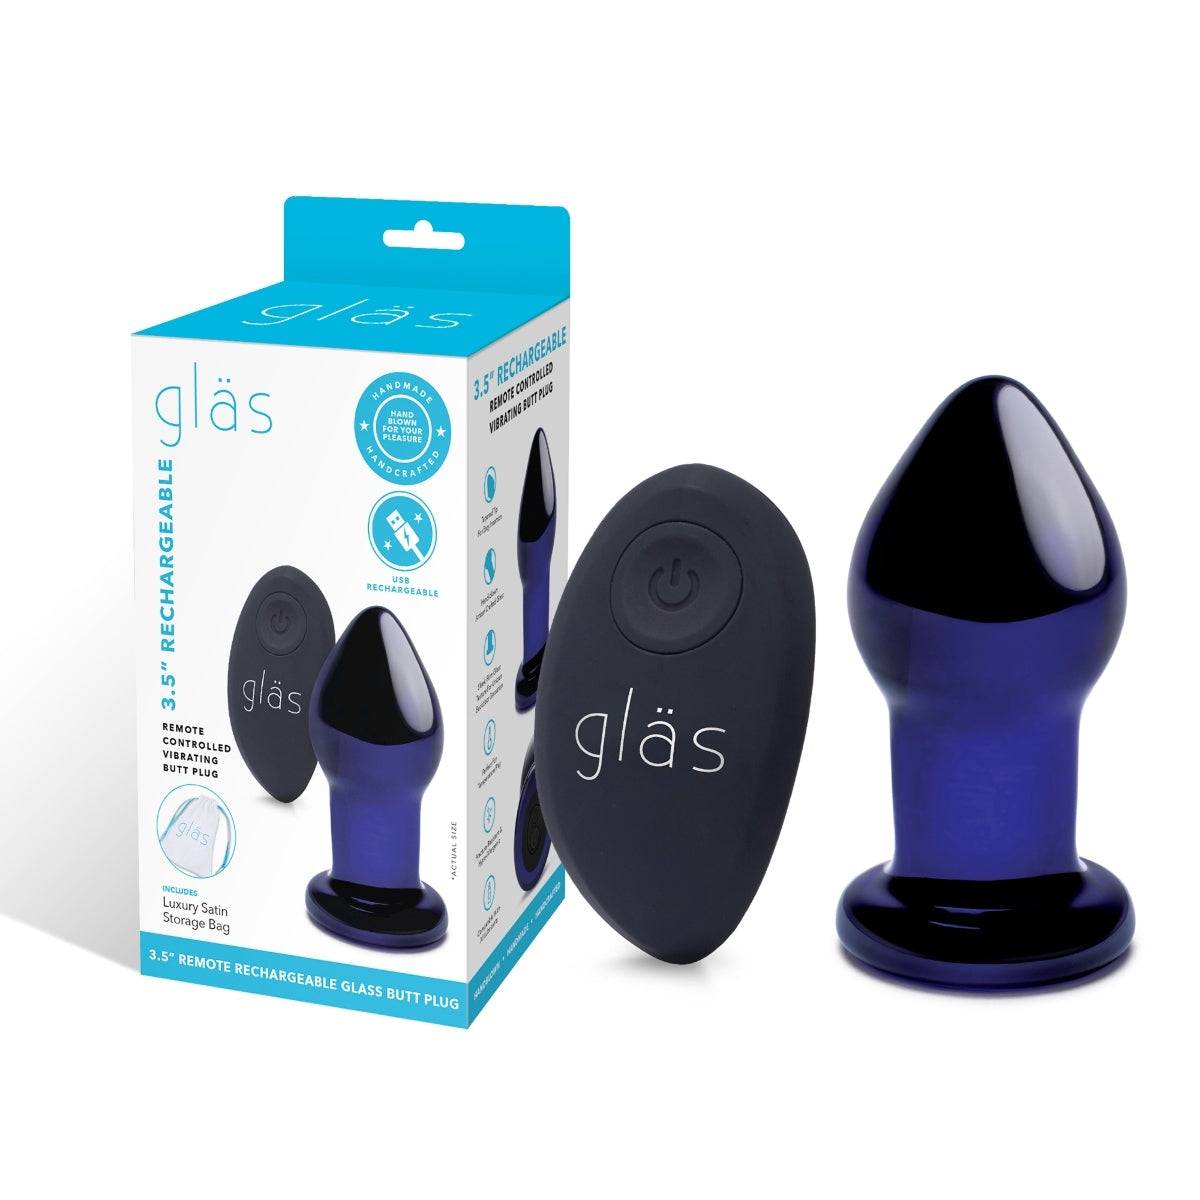 Glas Rechargeable Remote Controlled Vibrating Butt Plug Blue 3.5 Inch - Simply Pleasure